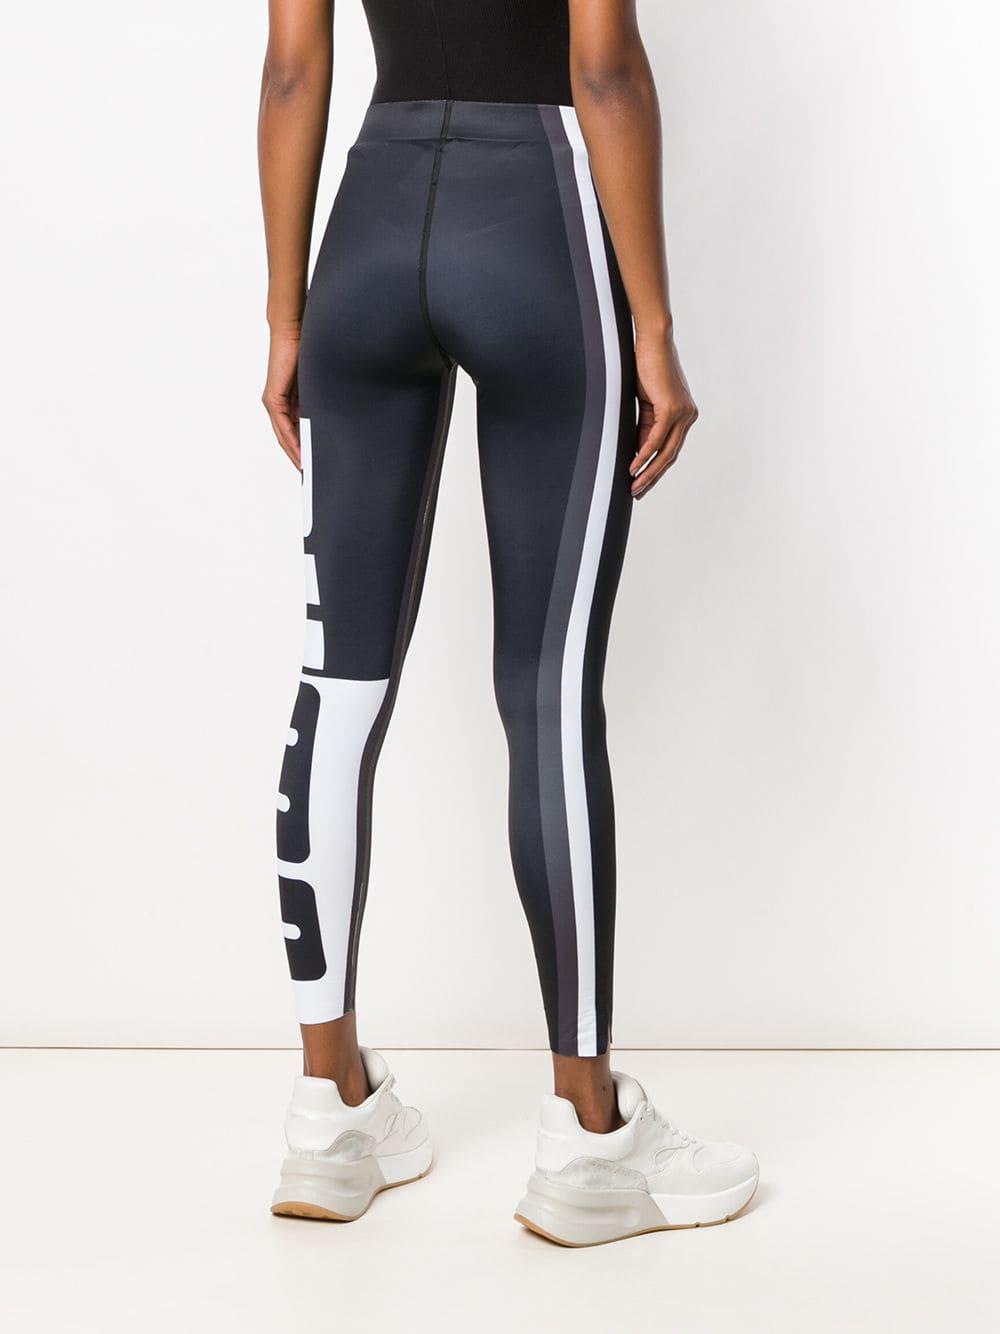 PUMA Synthetic Ambition Leggings in 